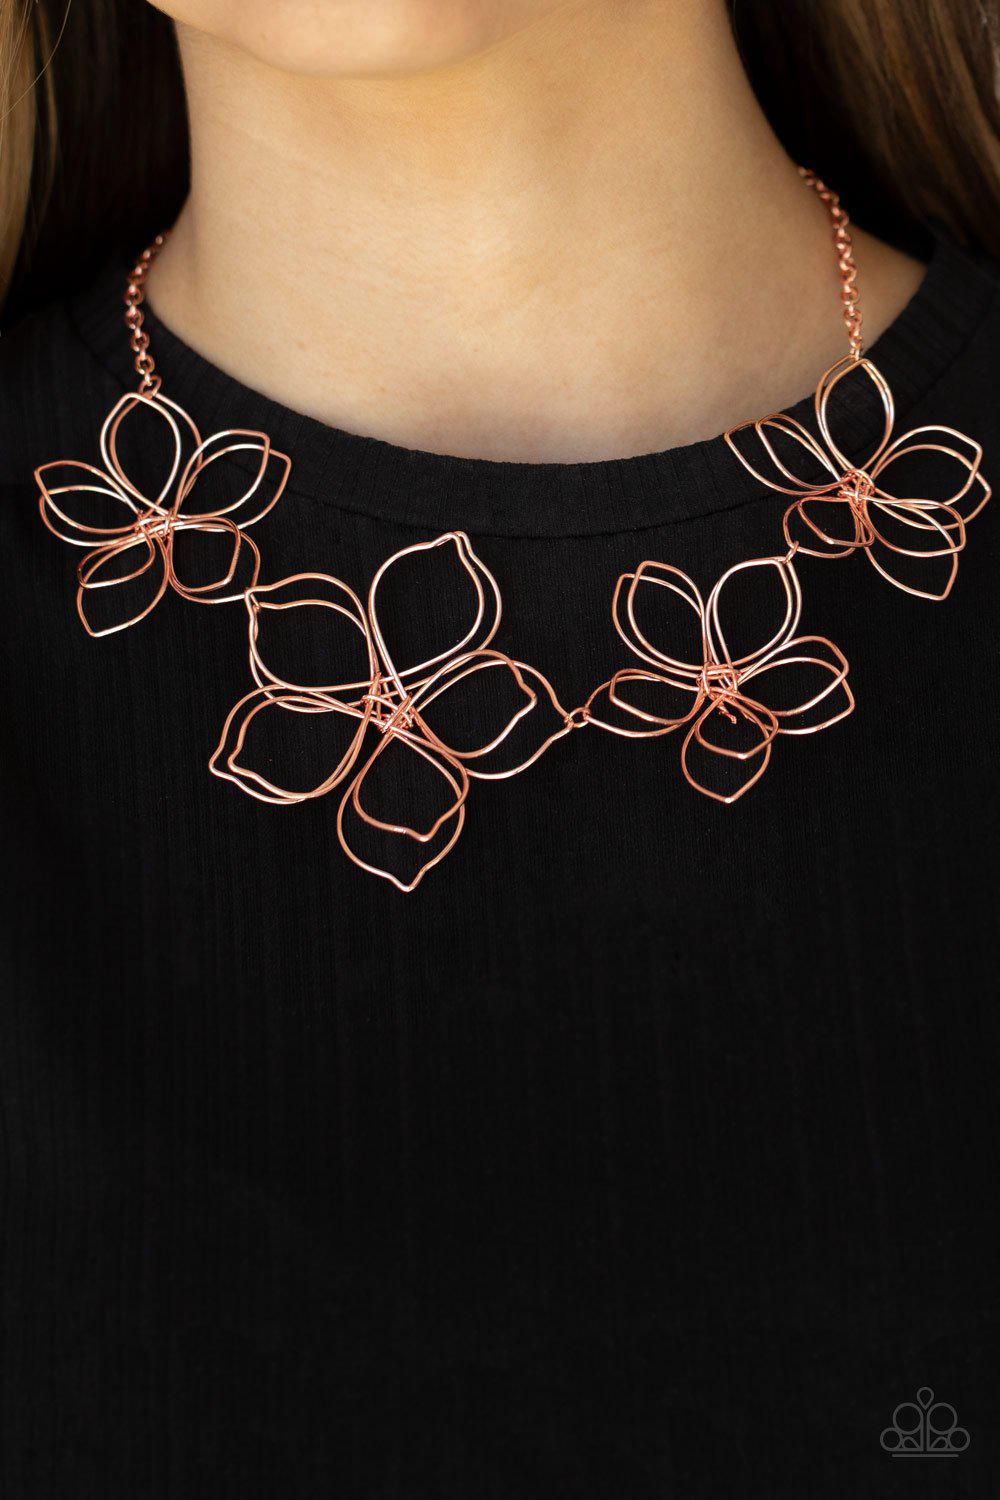 Flower Garden Fashionista Copper Wire Flower Necklace - Paparazzi Accessories 2021 Convention Exclusive- lightbox - CarasShop.com - $5 Jewelry by Cara Jewels